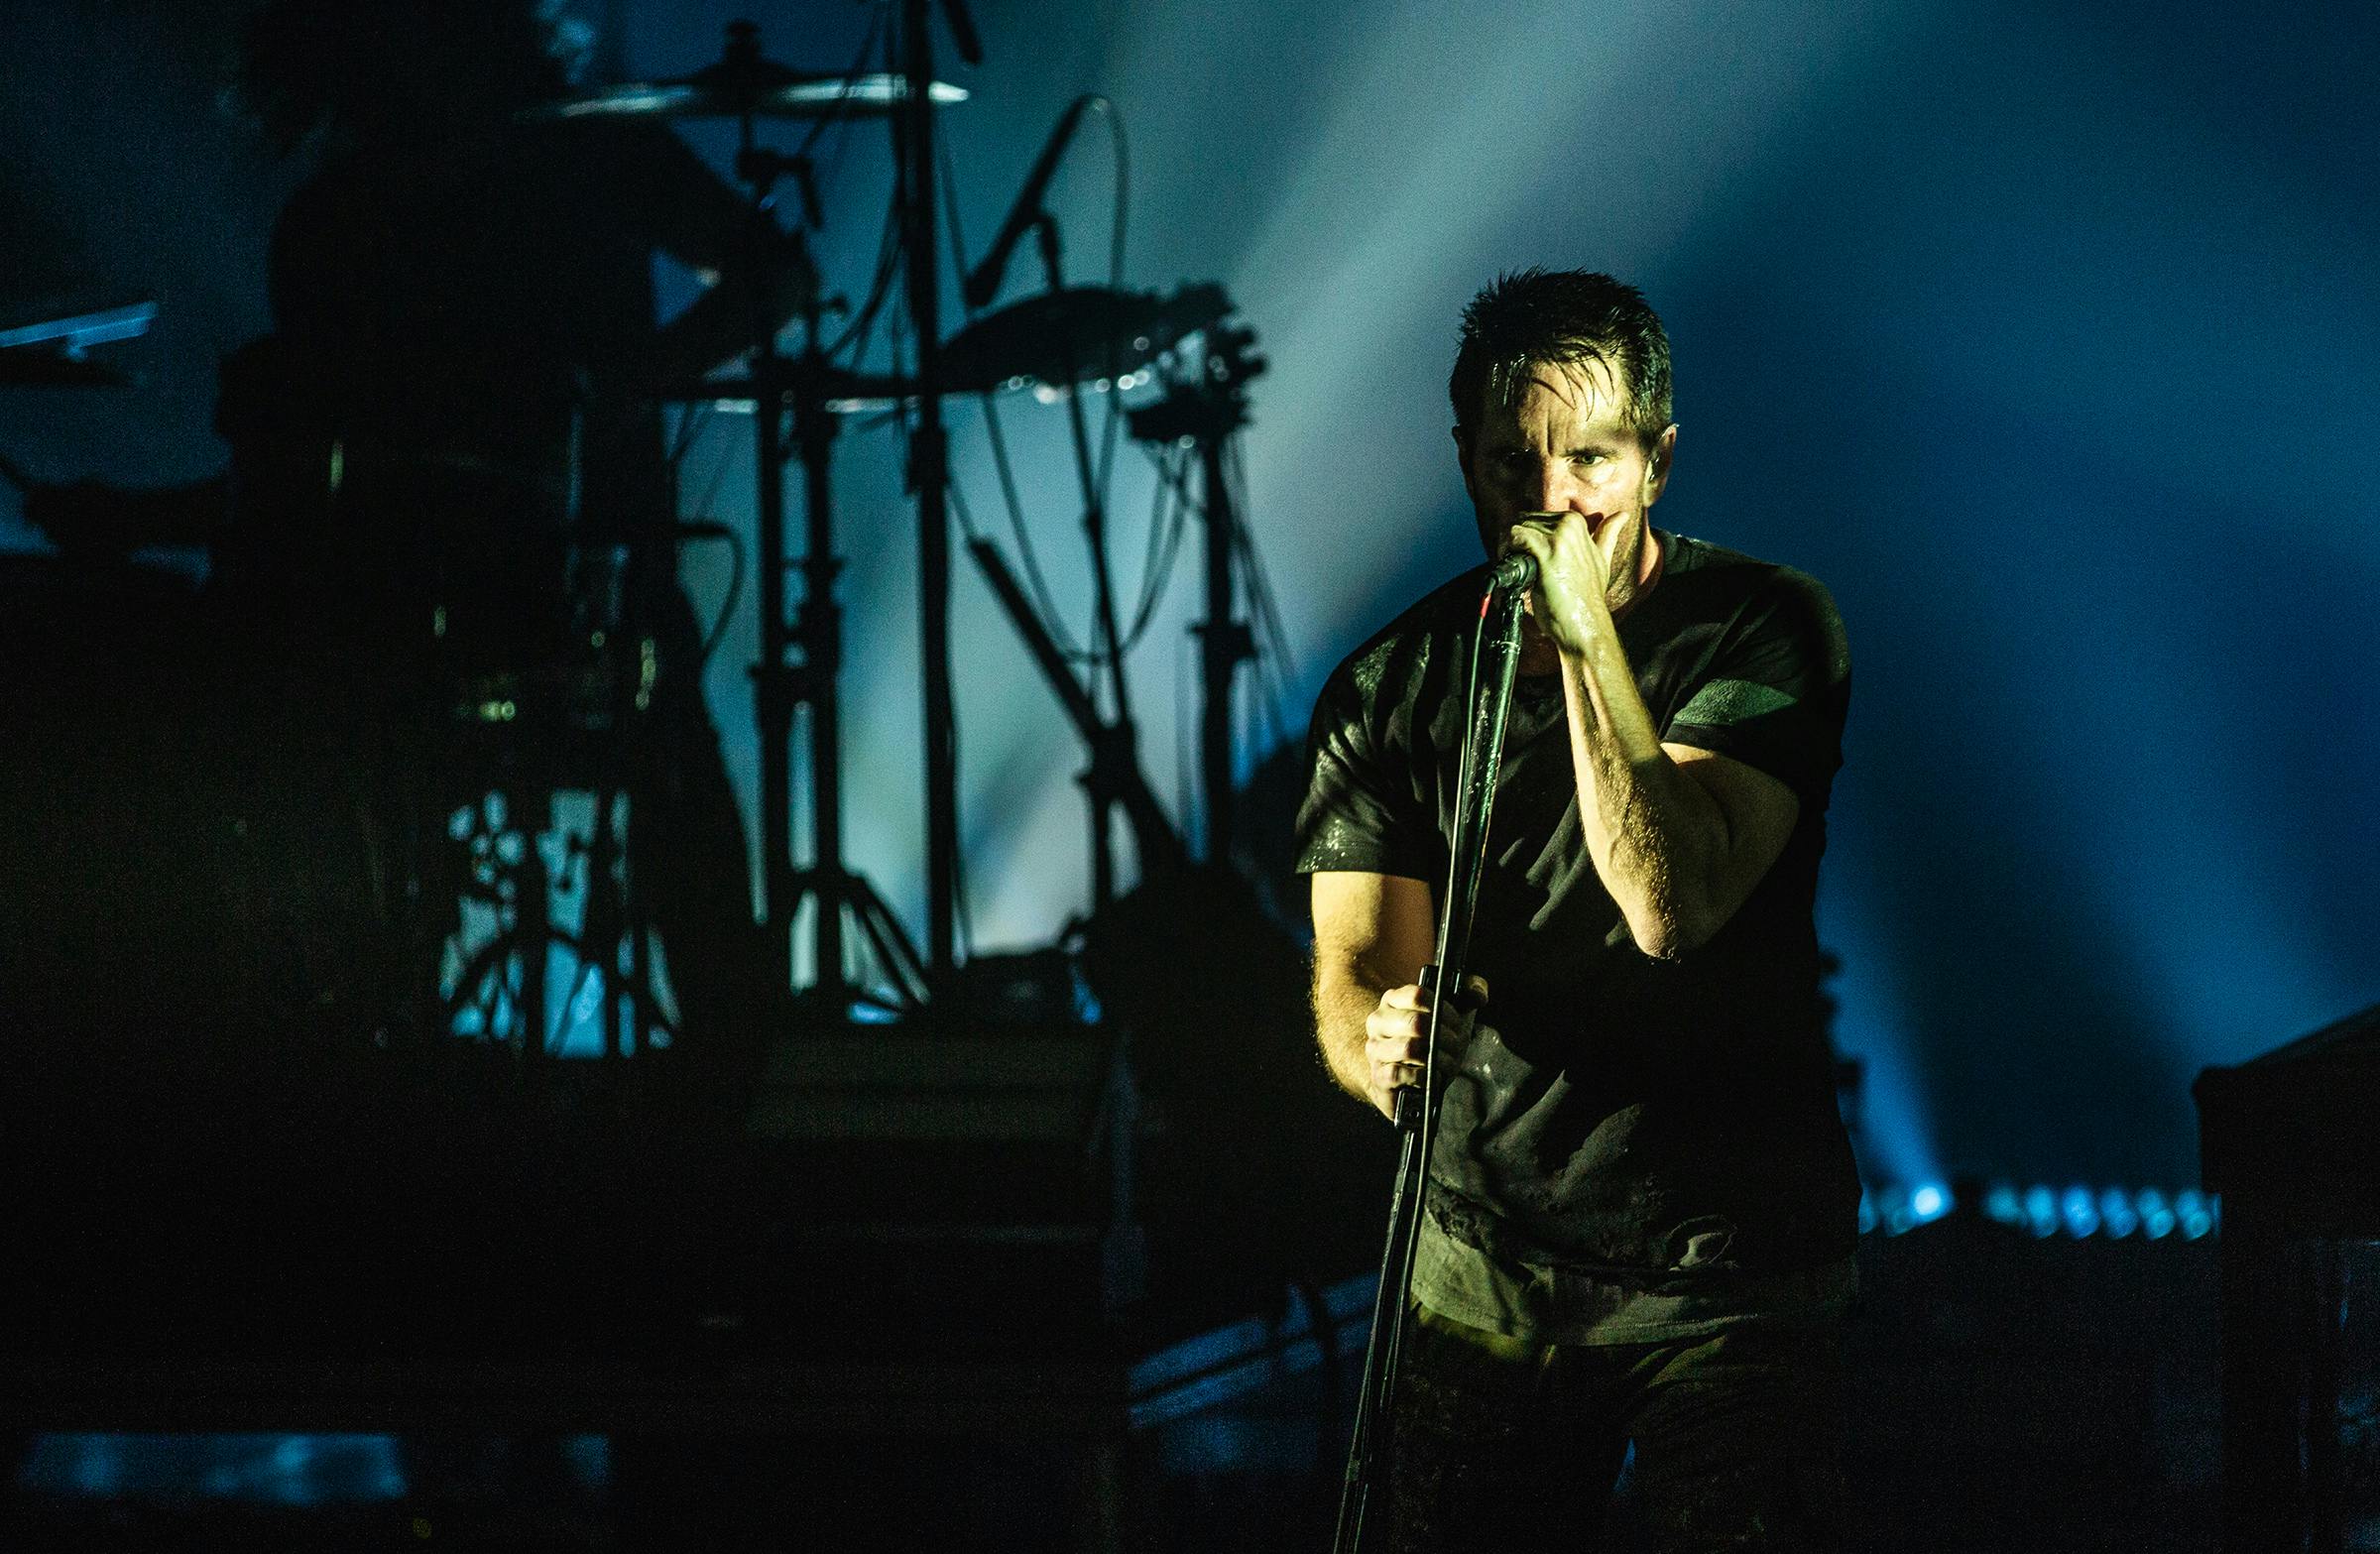 Trent Reznor working on new Nine Inch Nails material soon after Oscars win